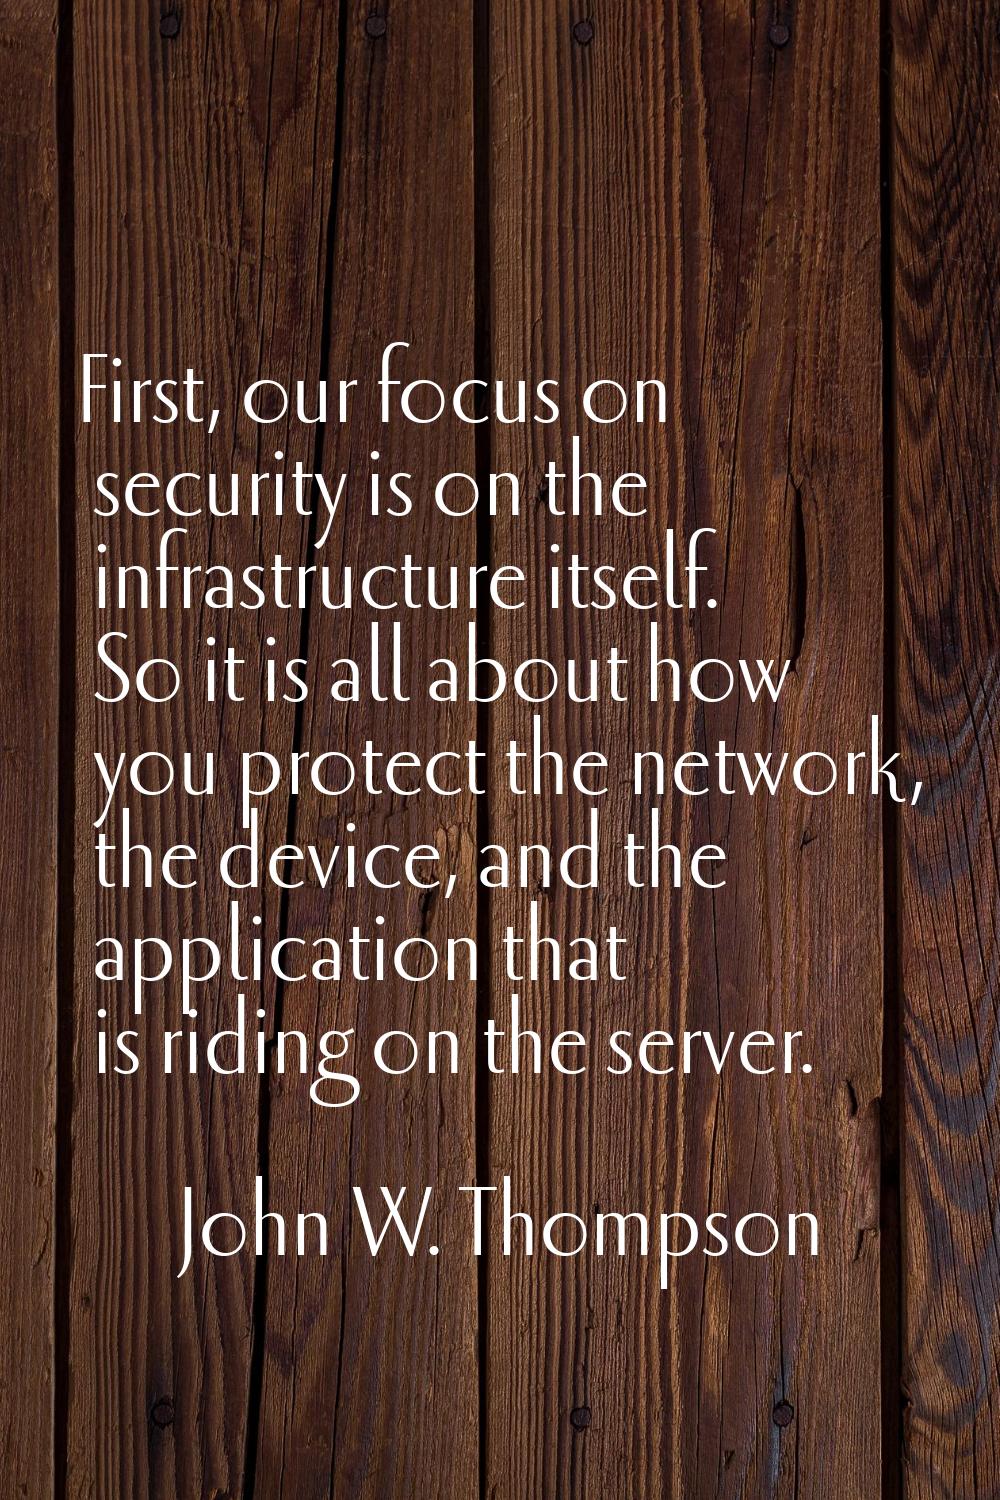 First, our focus on security is on the infrastructure itself. So it is all about how you protect th